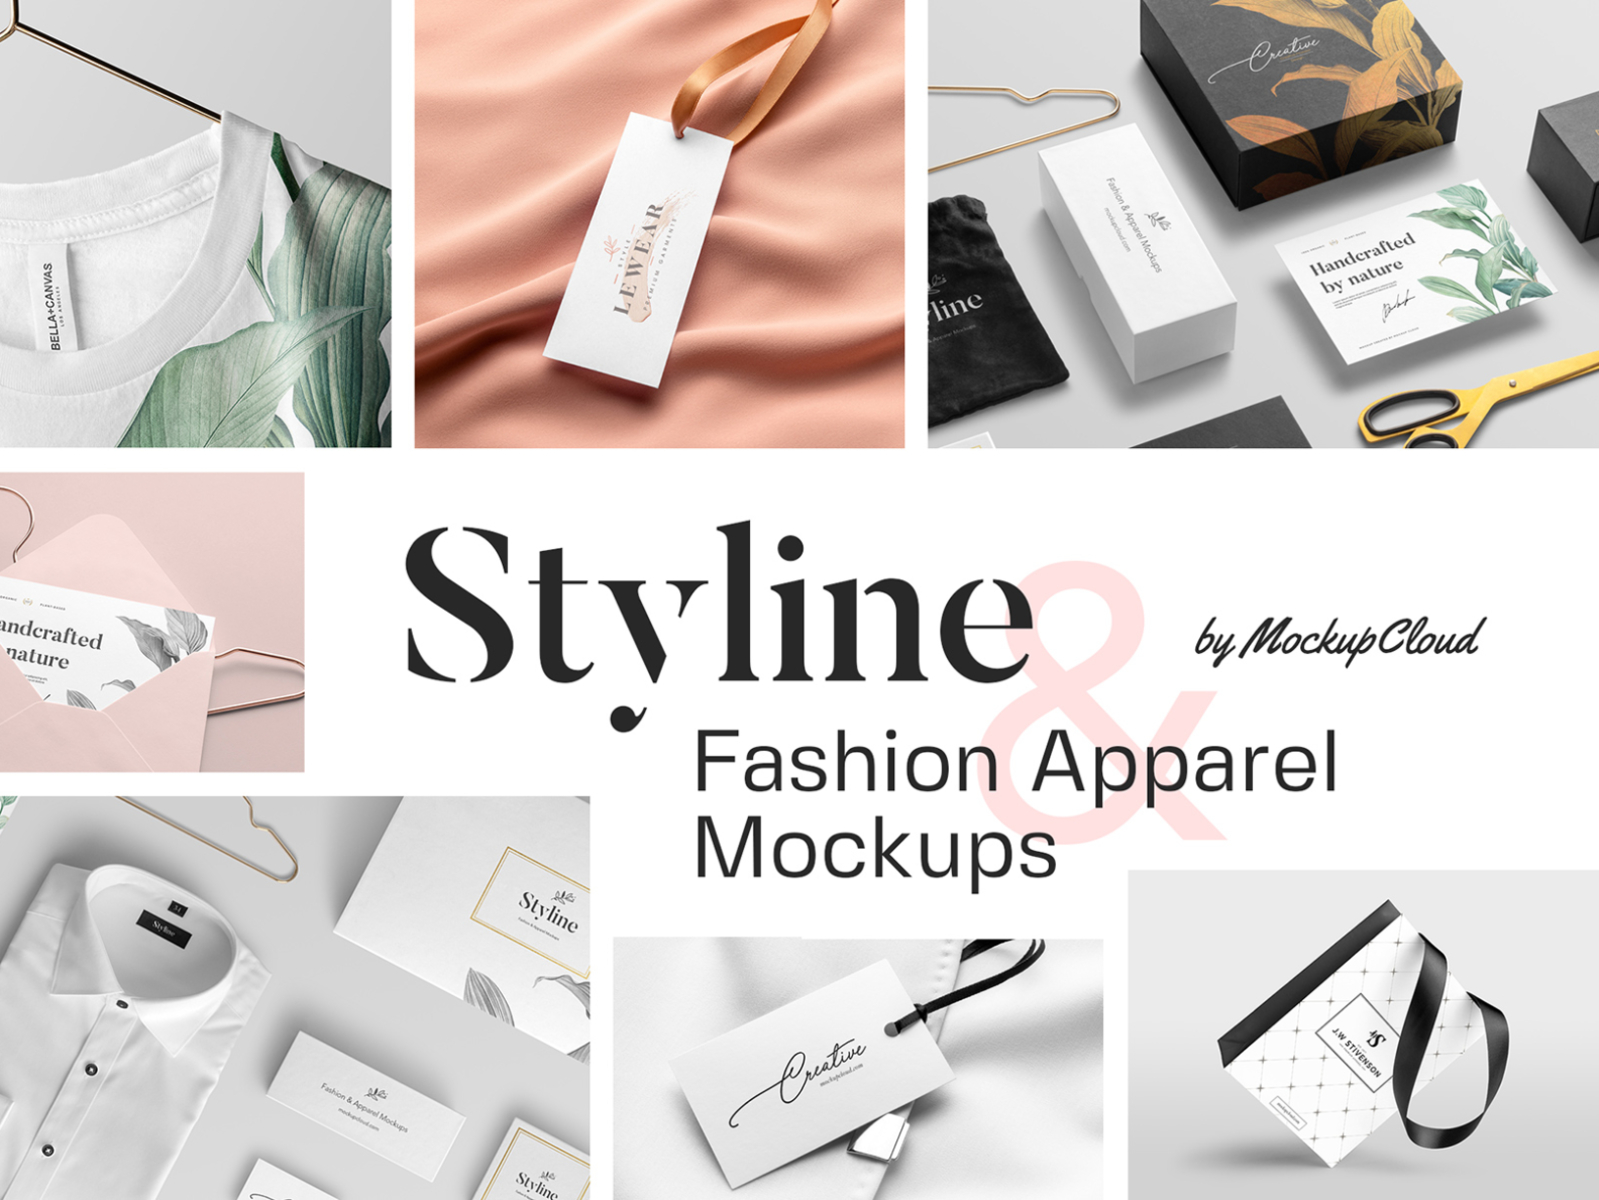 Download Free Fashion Tag Mockup Template by Mockup Cloud on Dribbble